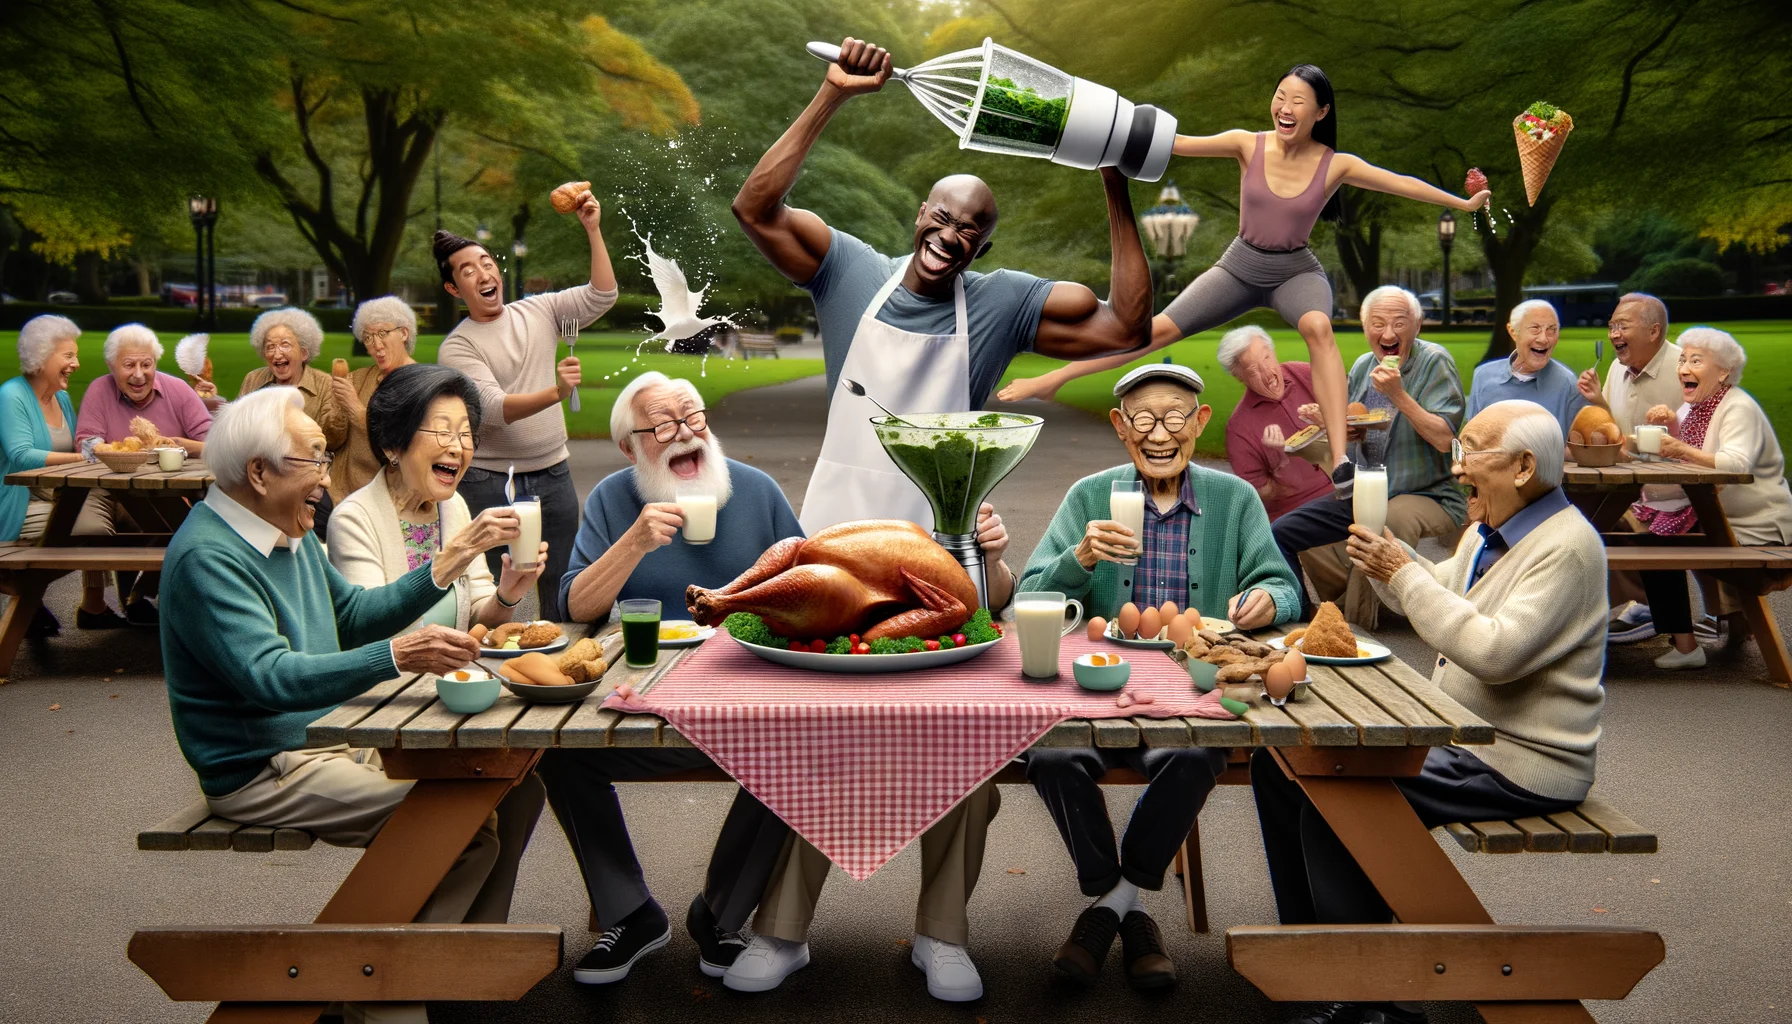 Imagine a humorous setting in a bustling park. A group of elderly individuals are sitting around a picnic table, unified in a unique LeanGains diet feast. A South Asian woman confidently lifts a turkey leg, grinning widely. Opposite her, a white man is delicately balancing five eggs on a spoon, and beside him, a Black man is struggling to control a blender full of leafy greens, splattering a Hispanic woman laughing heartily. In the background, other seniors look on with envy and amusement, from their traditional afternoon tea and cookies. Add elements of fun and surprise to capture the humour.